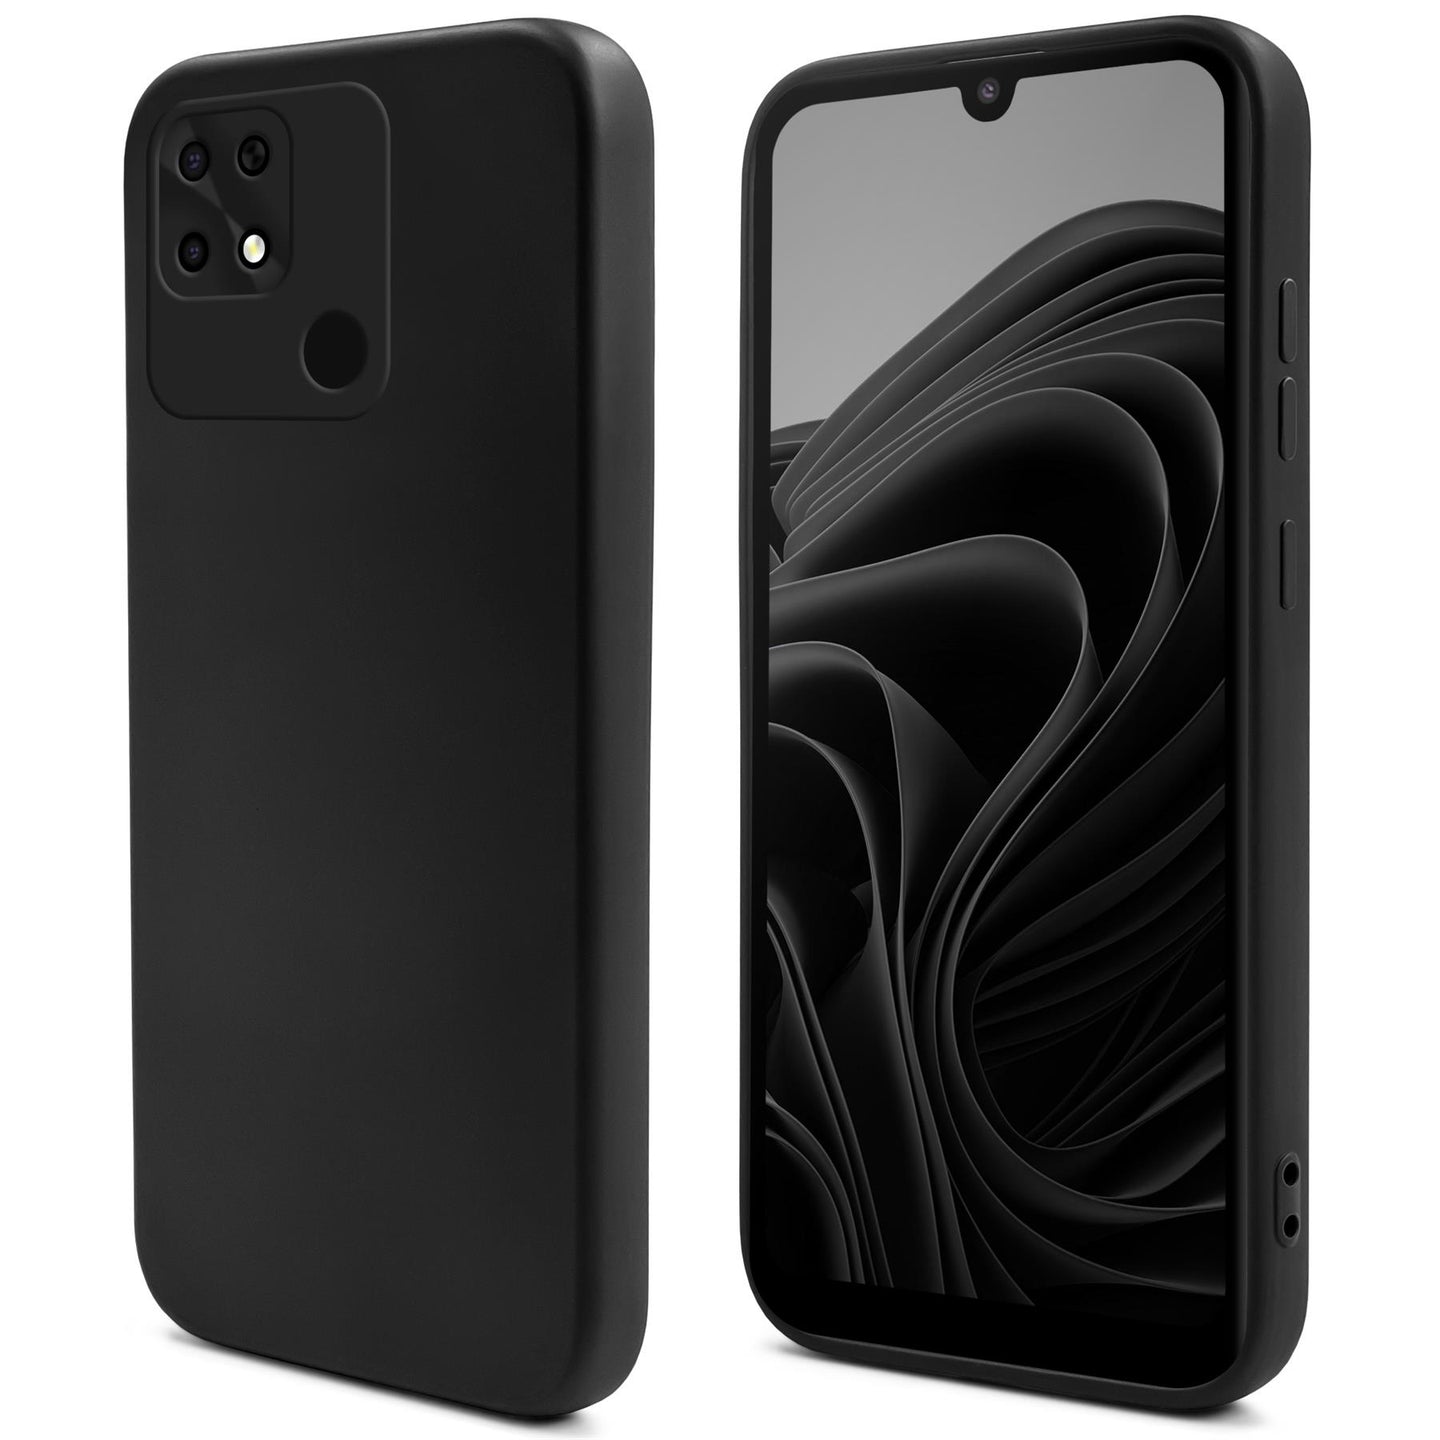 Moozy Lifestyle. Silicone Case for Xiaomi Redmi 10C, Black - Liquid Silicone Lightweight Cover with Matte Finish and Soft Microfiber Lining, Premium Silicone Case